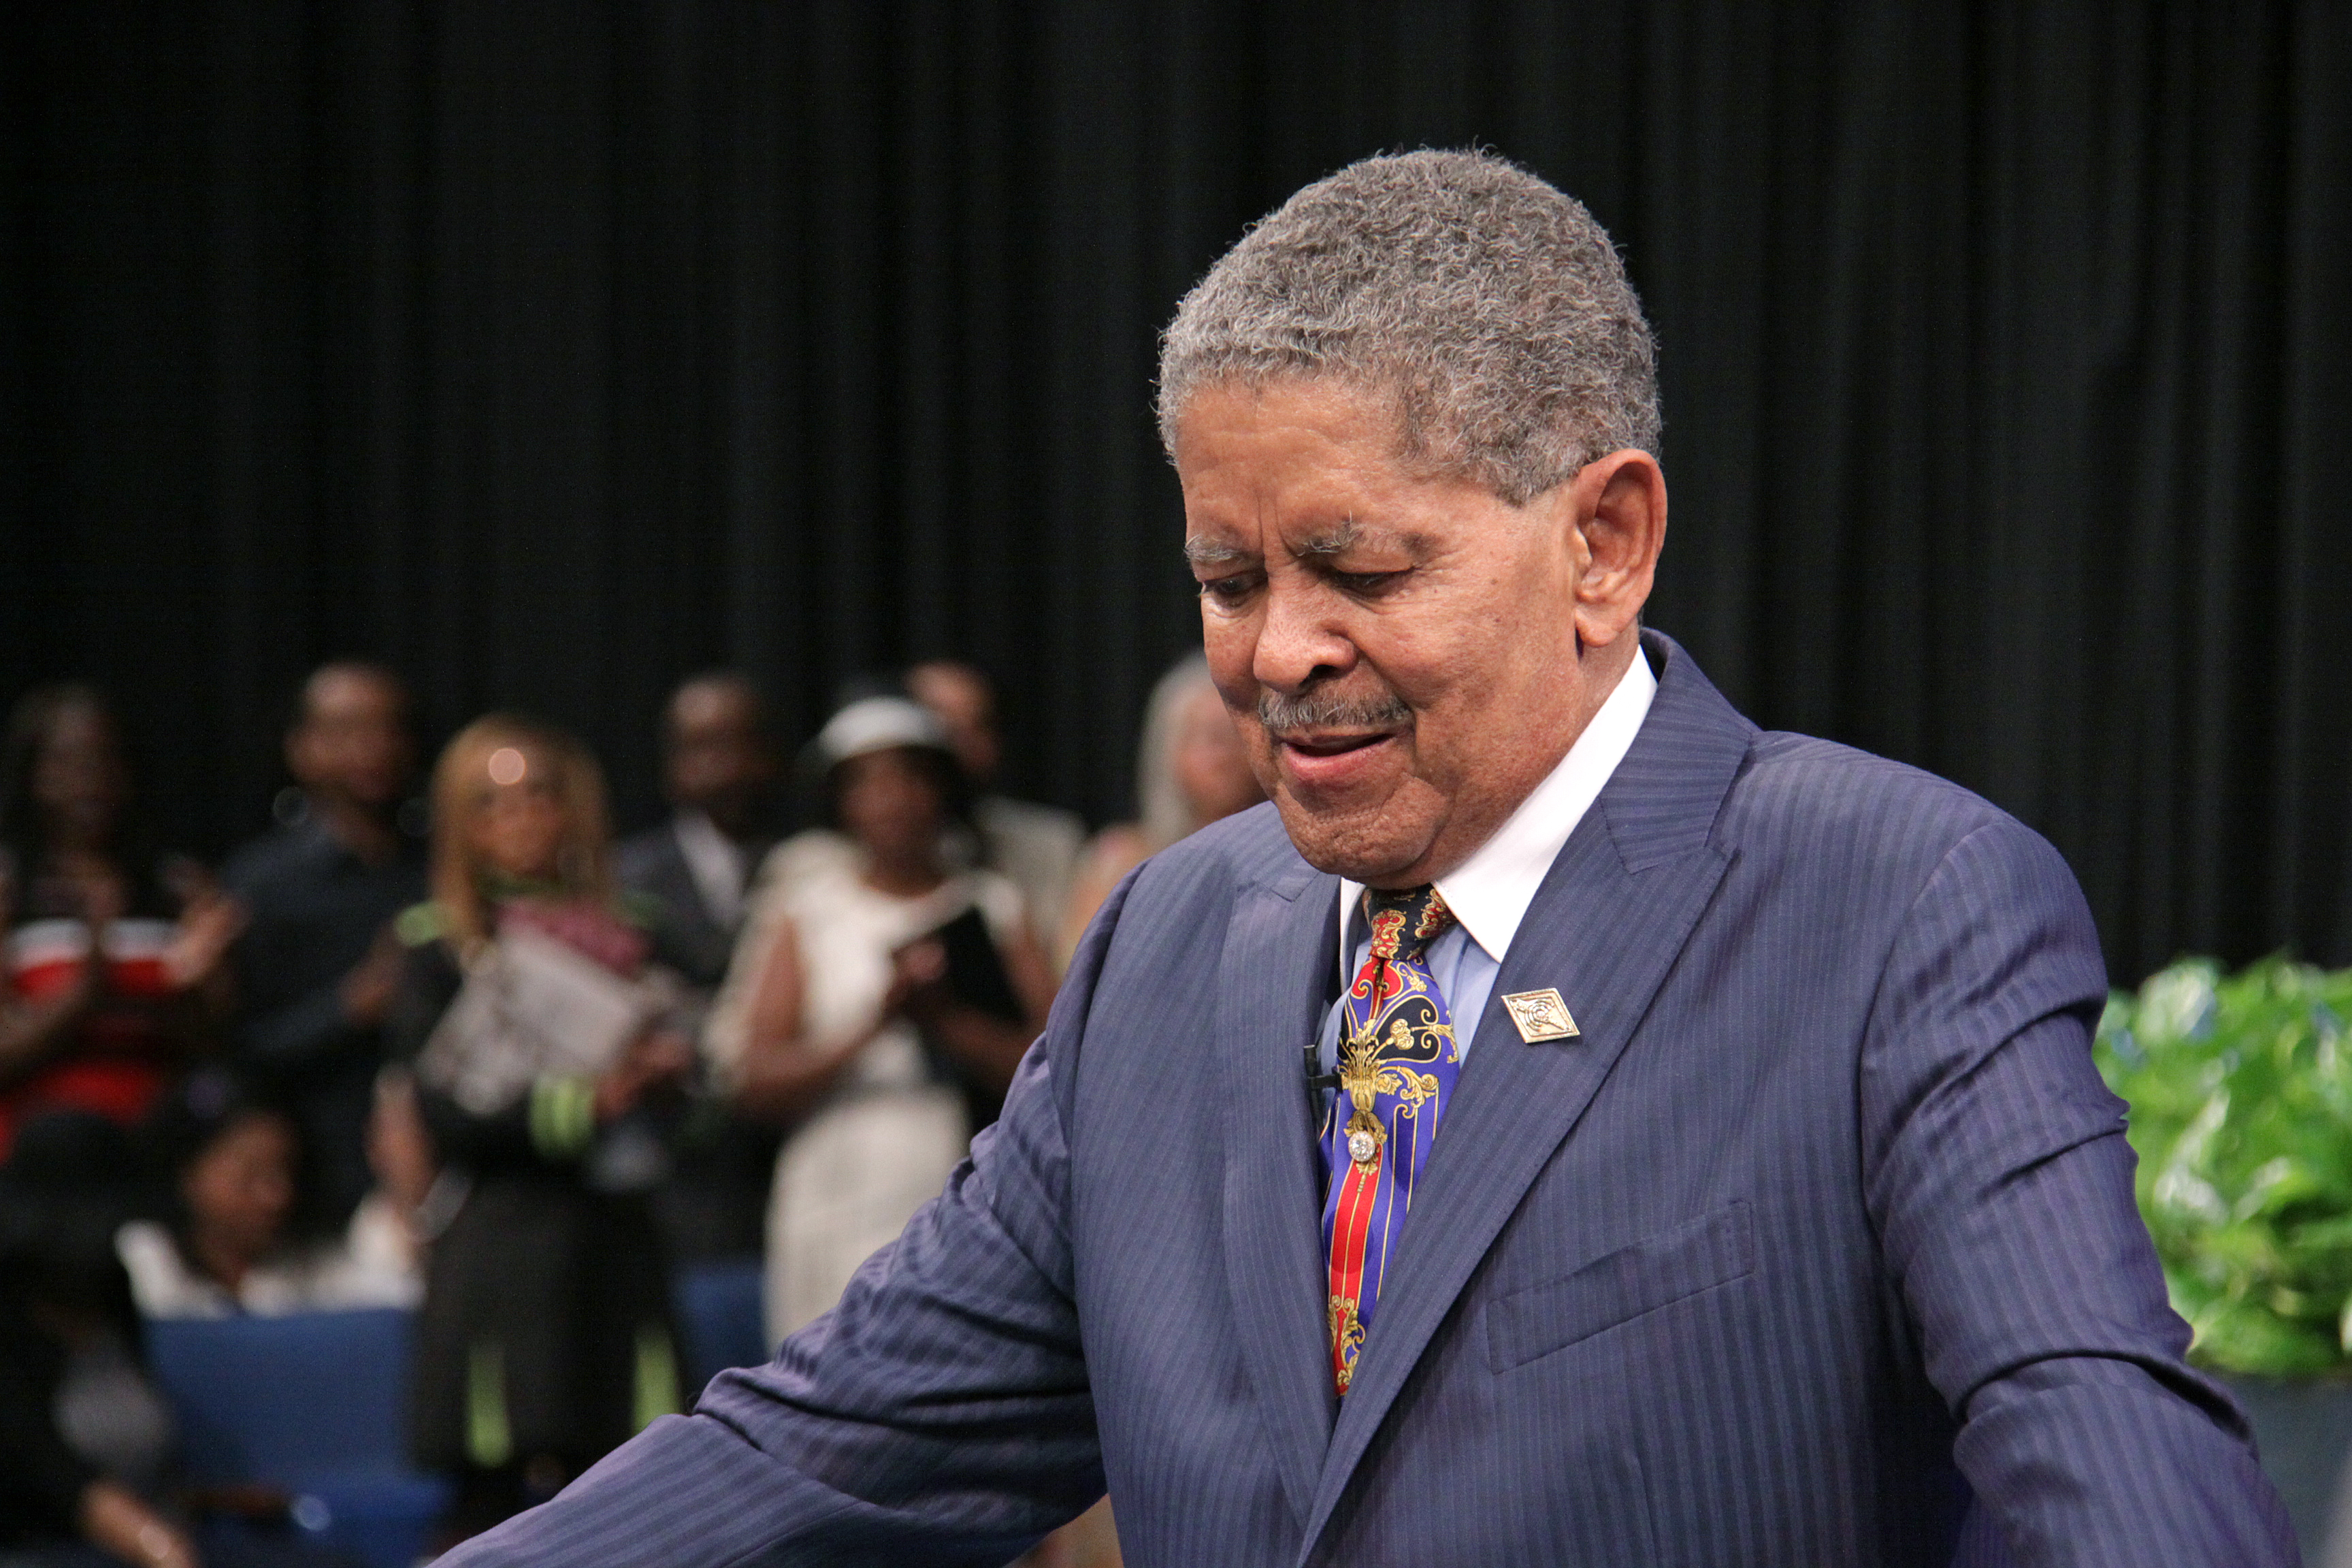 pastor fred price died